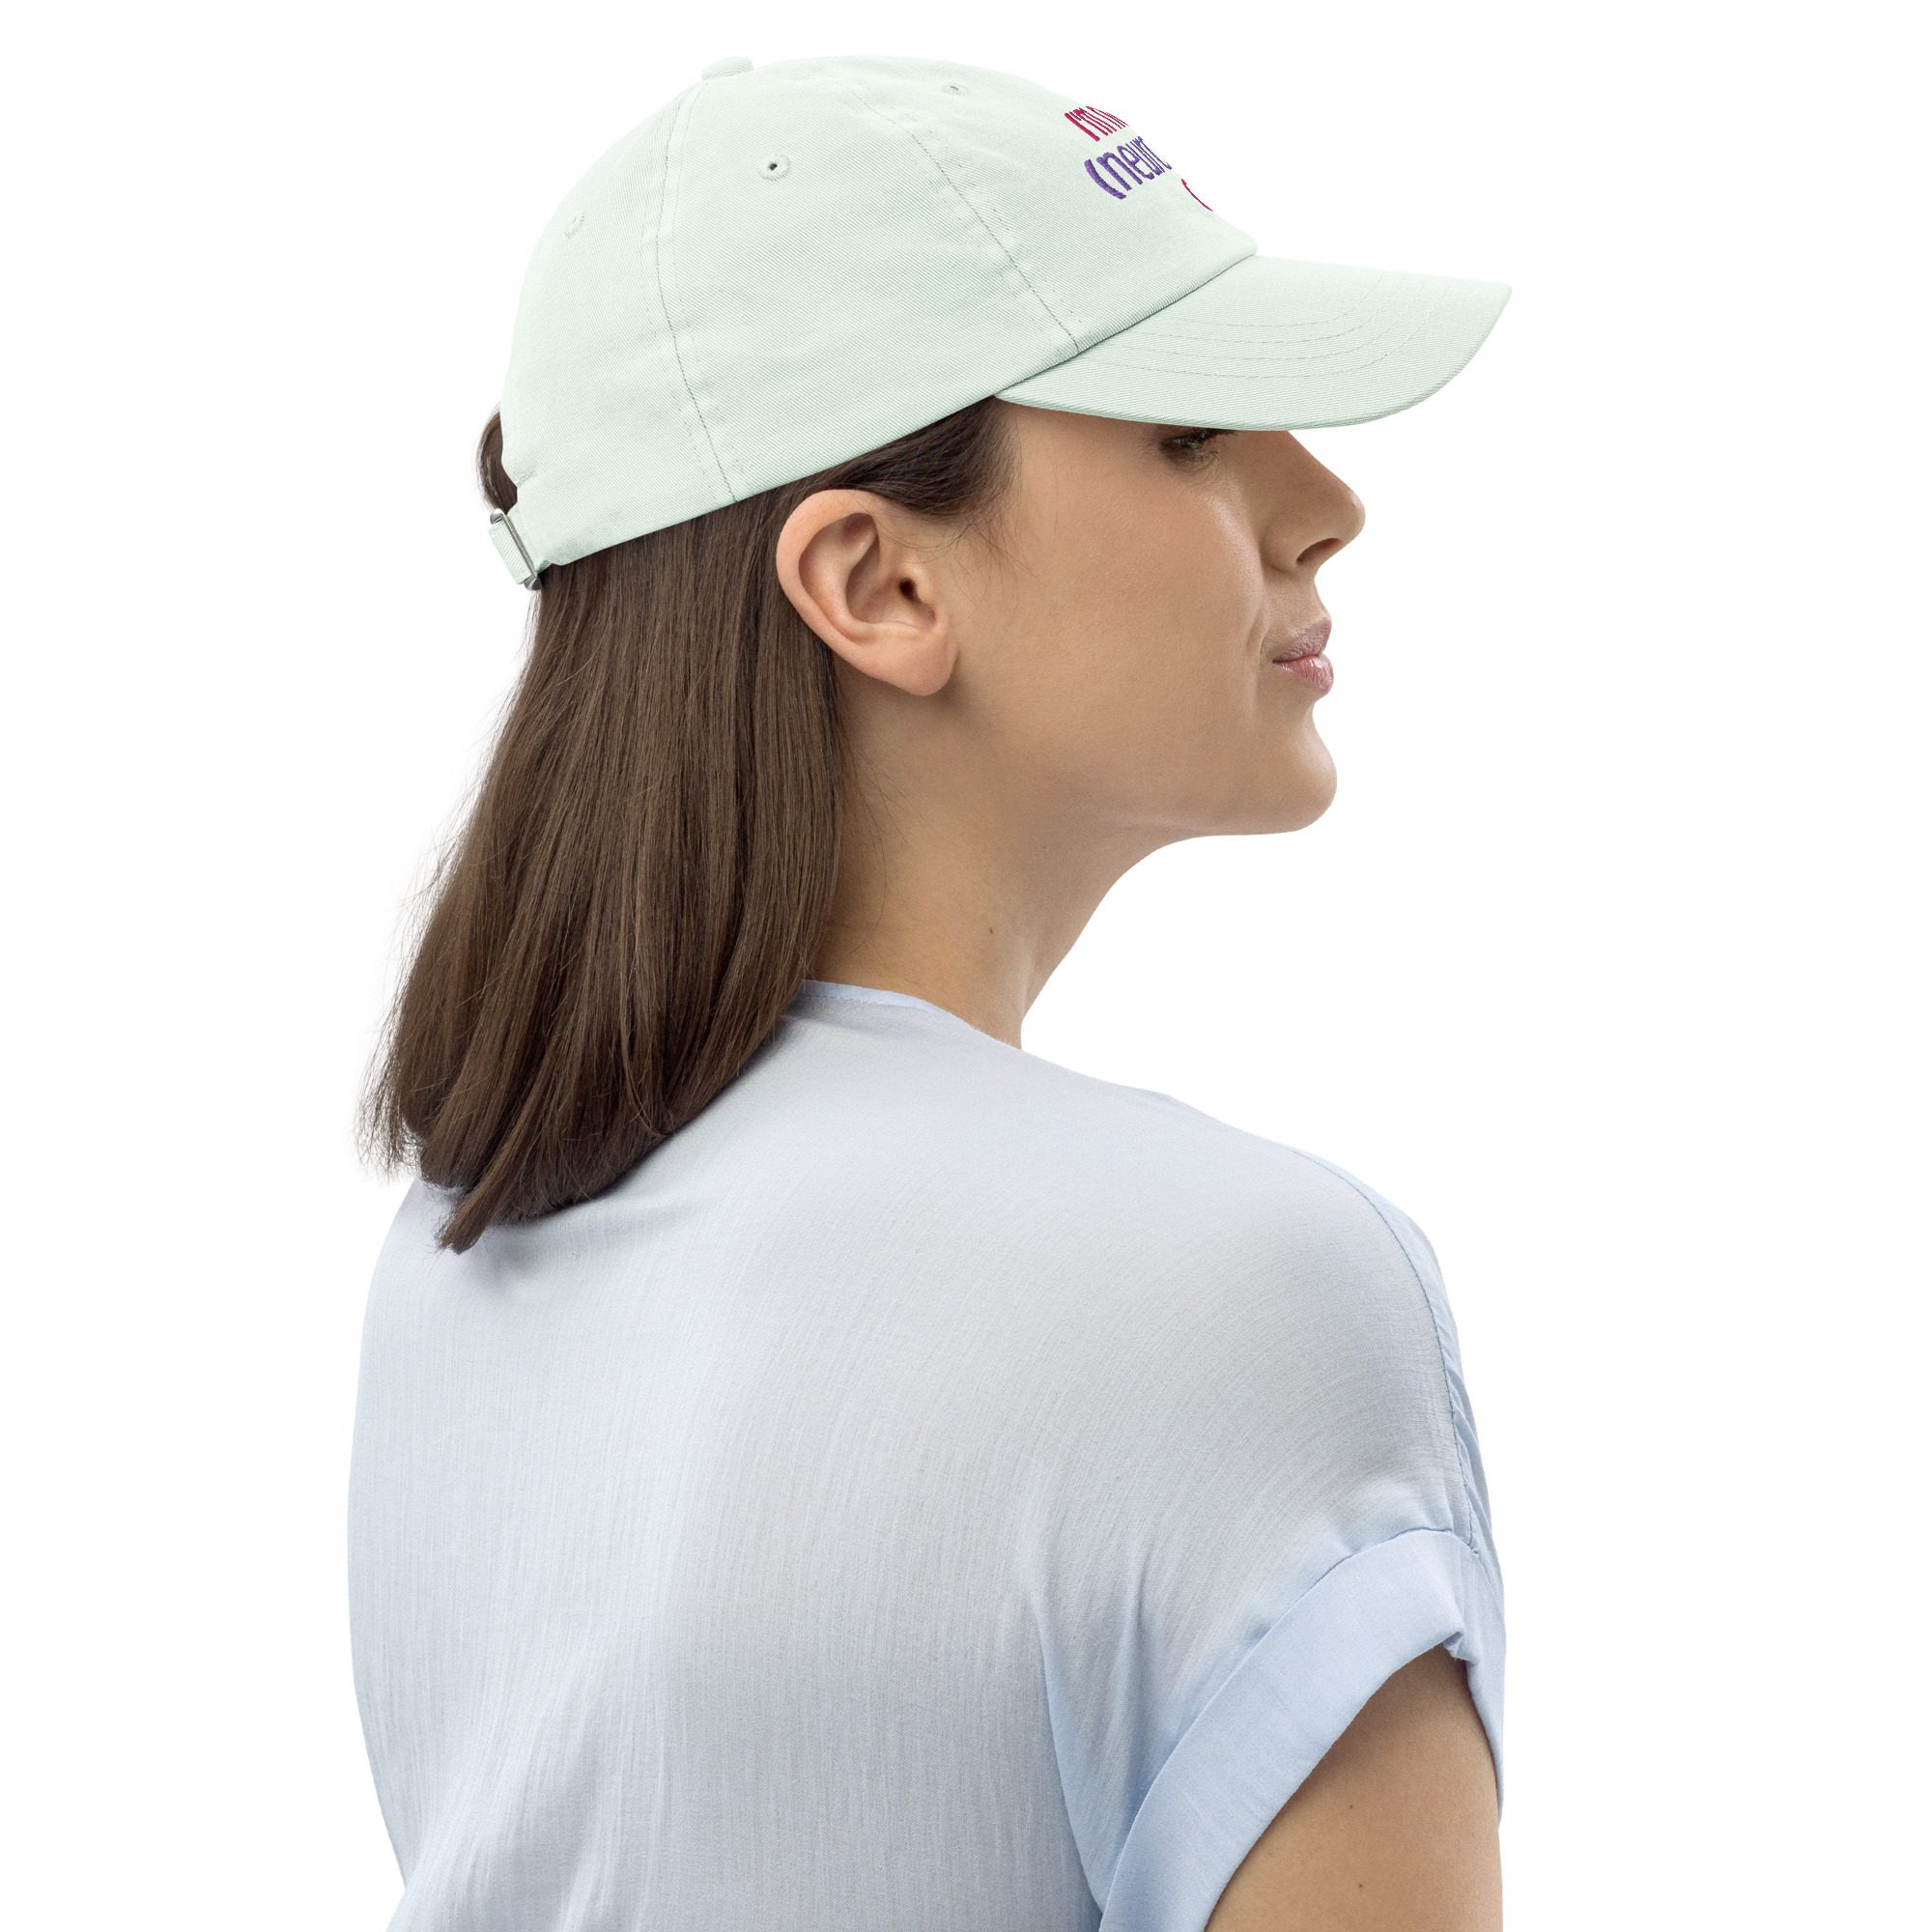 I’m Not Your Neurotypical Girl Pastel Baseball Hat